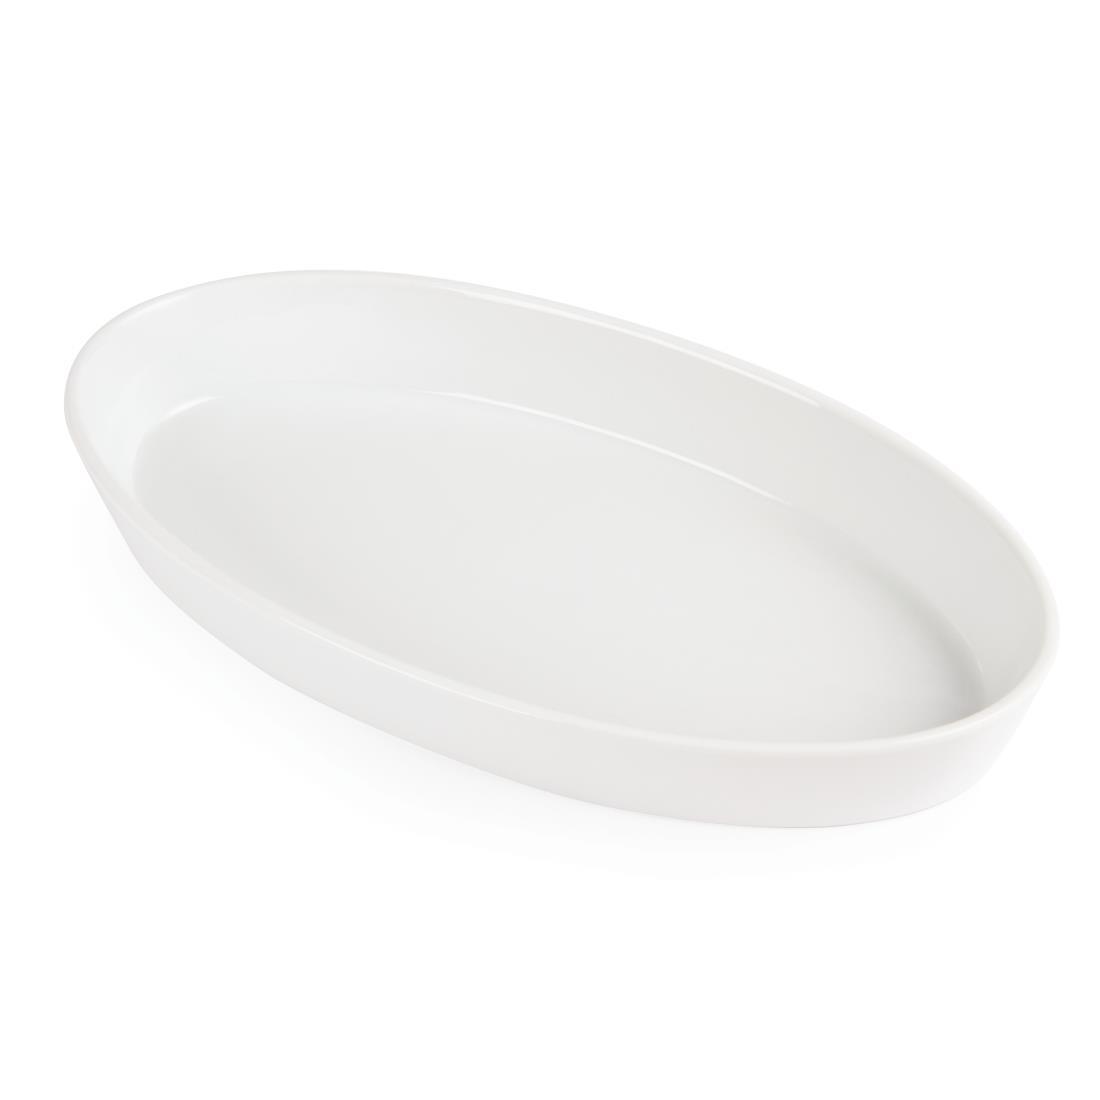 Olympia Whiteware Oval Sole Dishes 330x 180mm (Pack of 6) - W422  - 4